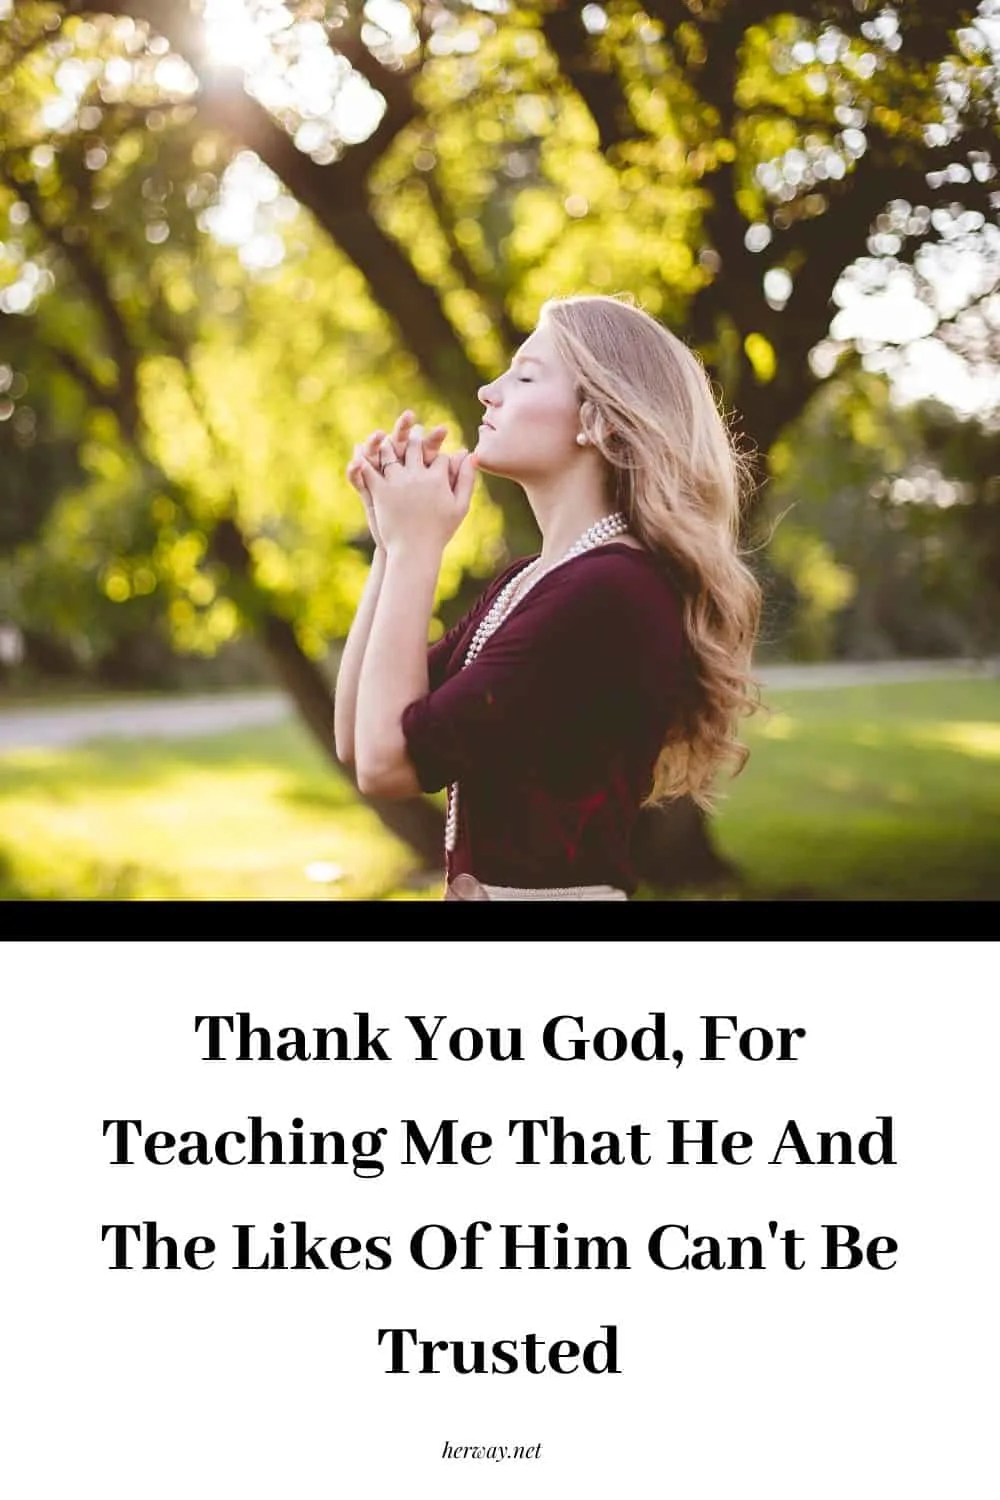 Thank You God, For Teaching Me That He And The Likes Of Him Can't Be Trusted